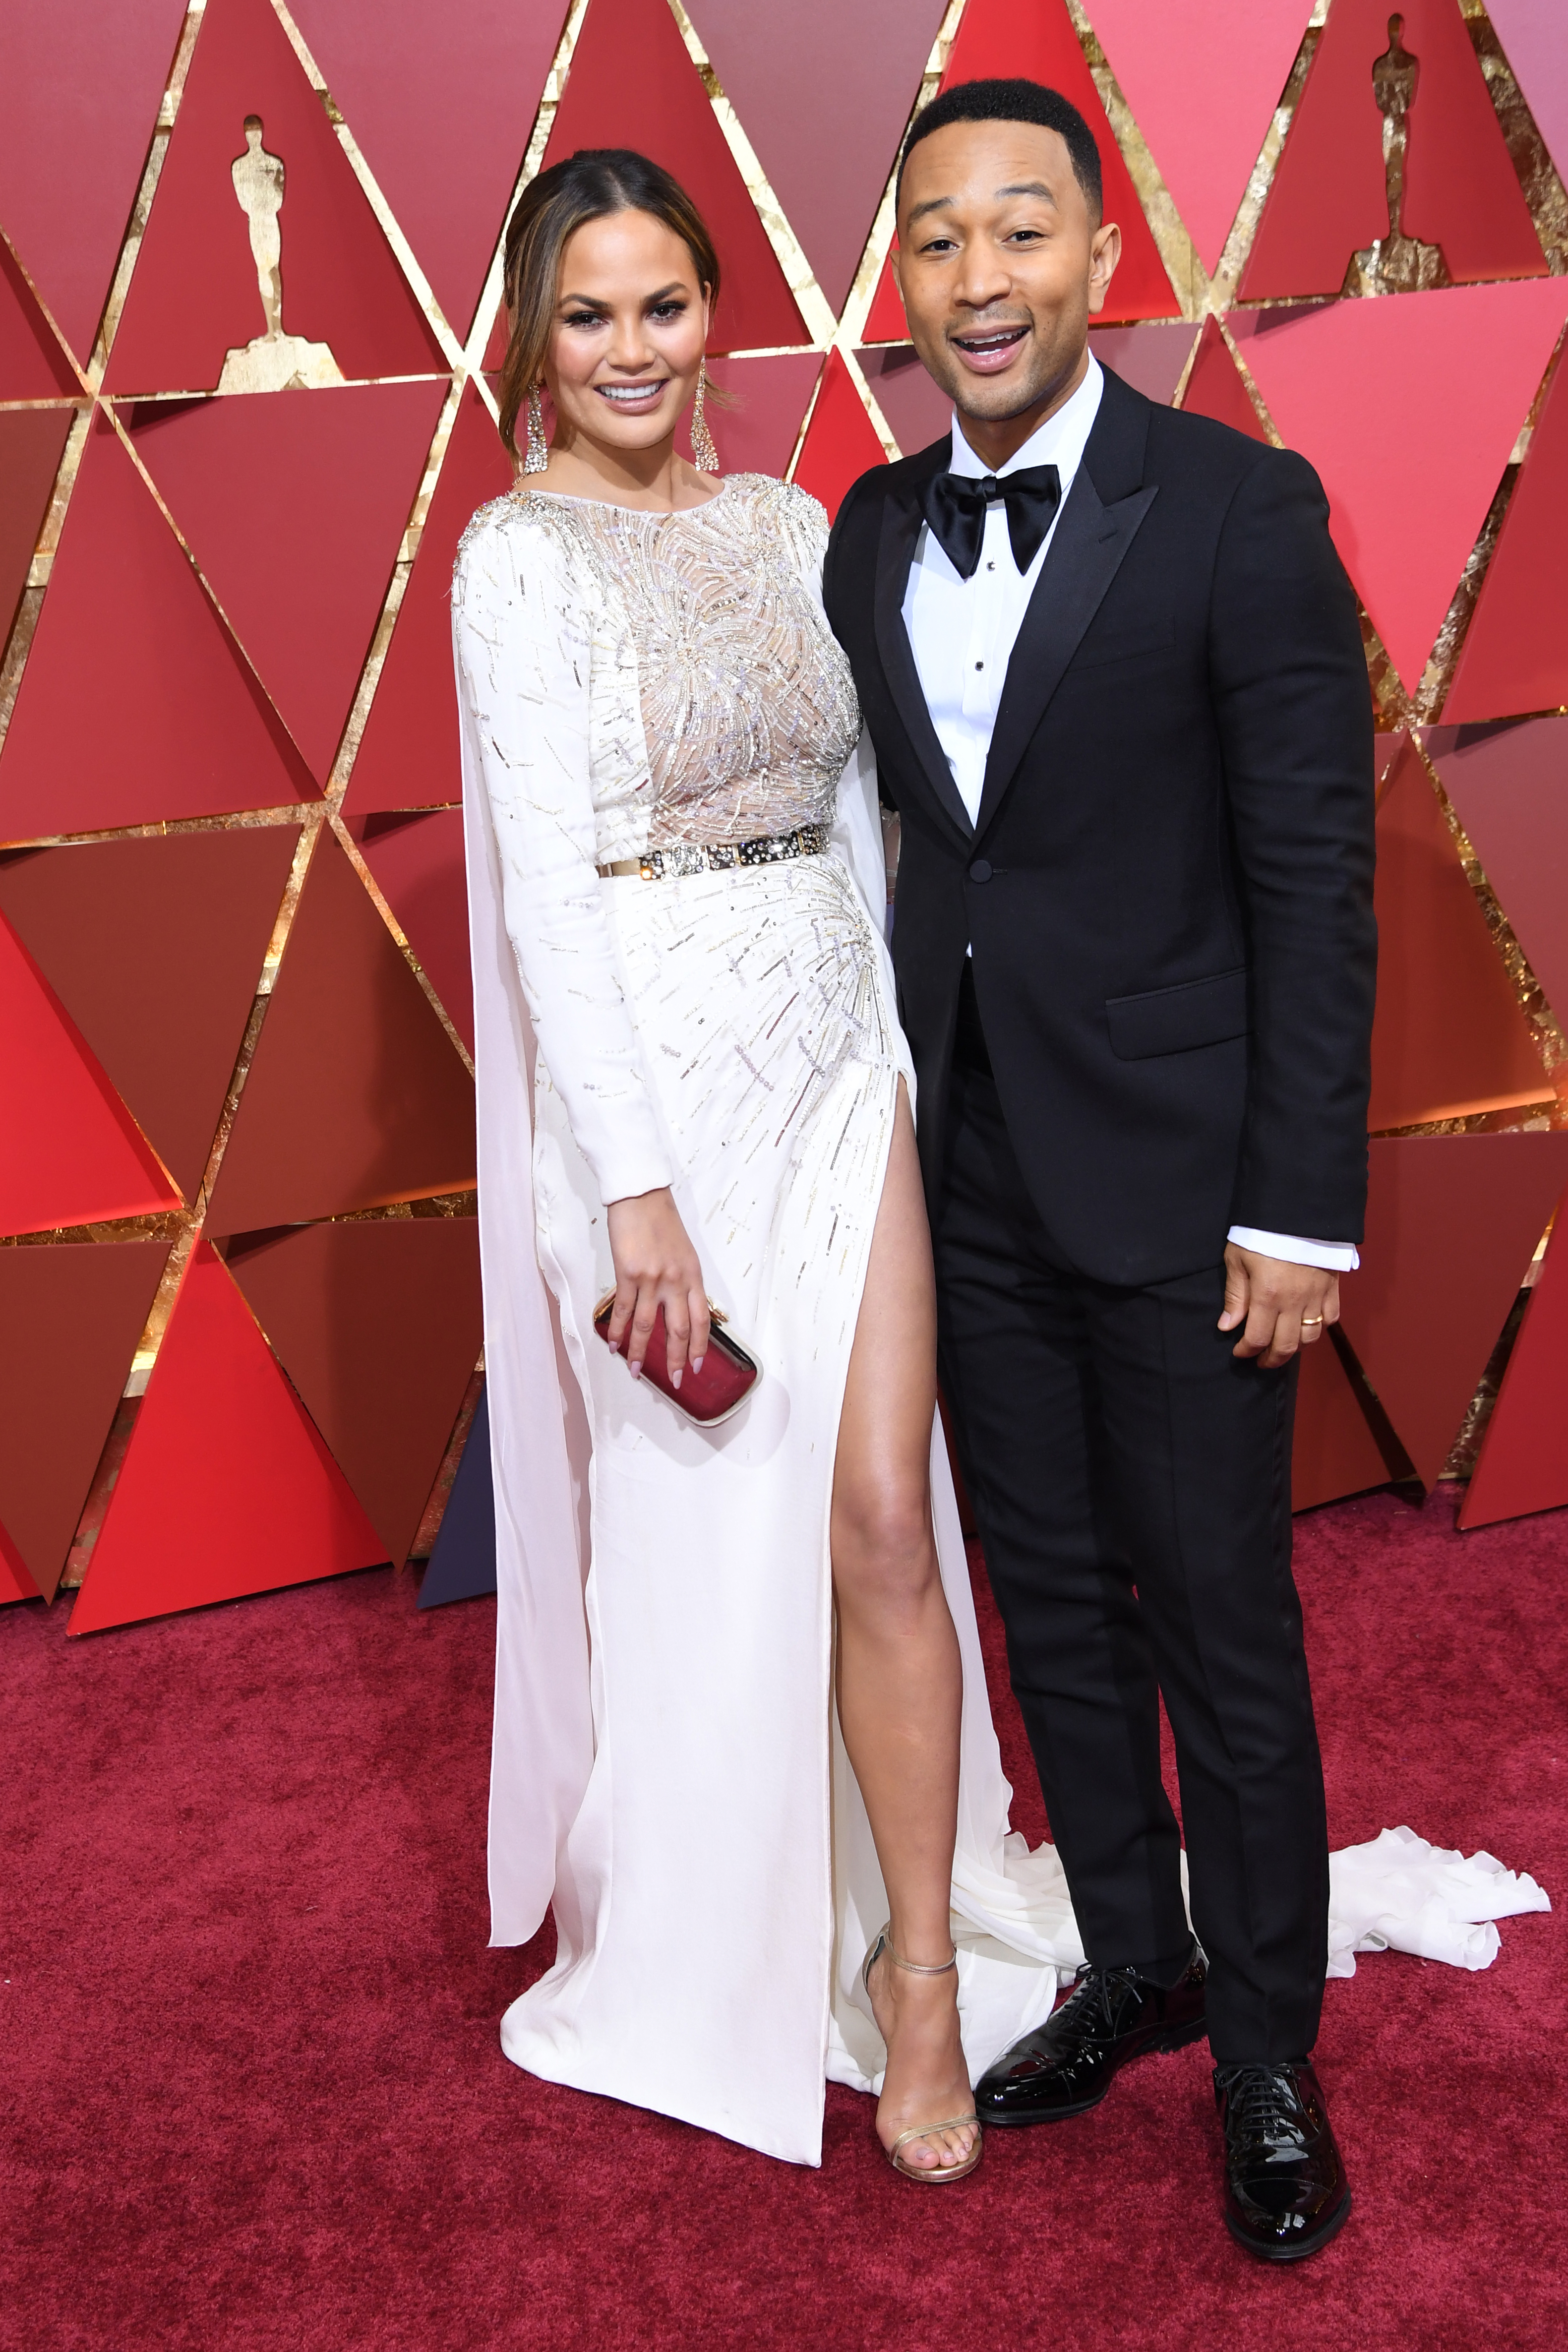 US singer John Legend (R) and his wife US model Chrissy Teigen pose as they arrive on the red carpet for the 89th Oscars on February 26, 2017 in Hollywood, California.  / AFP PHOTO / ANGELA WEISS